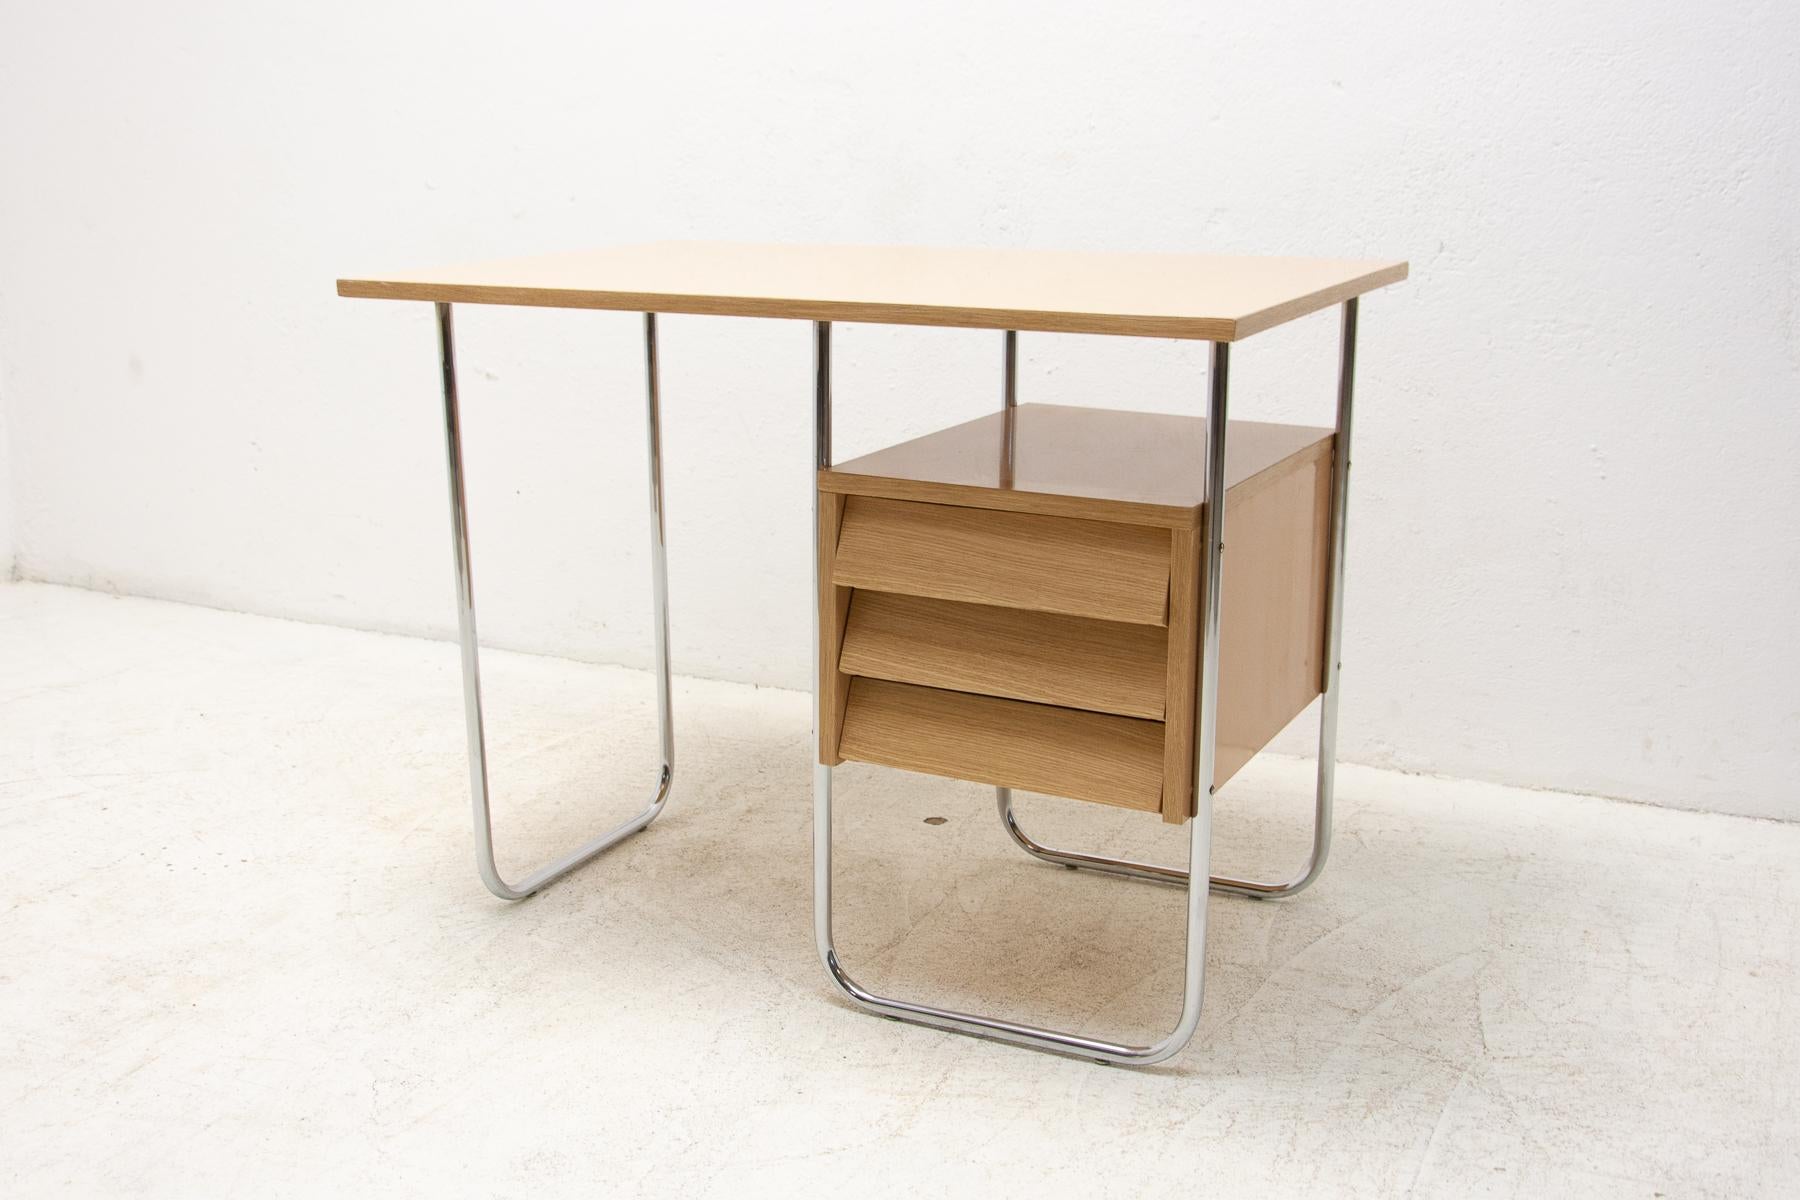 Midcentury writing desk with three plastic drawer. It has a construction of chrome pipes and a formica plate.

Very simple design, typical for the period of the 1930s–1950s in the former Czechoslovakia.

In very good vintage condition, shows